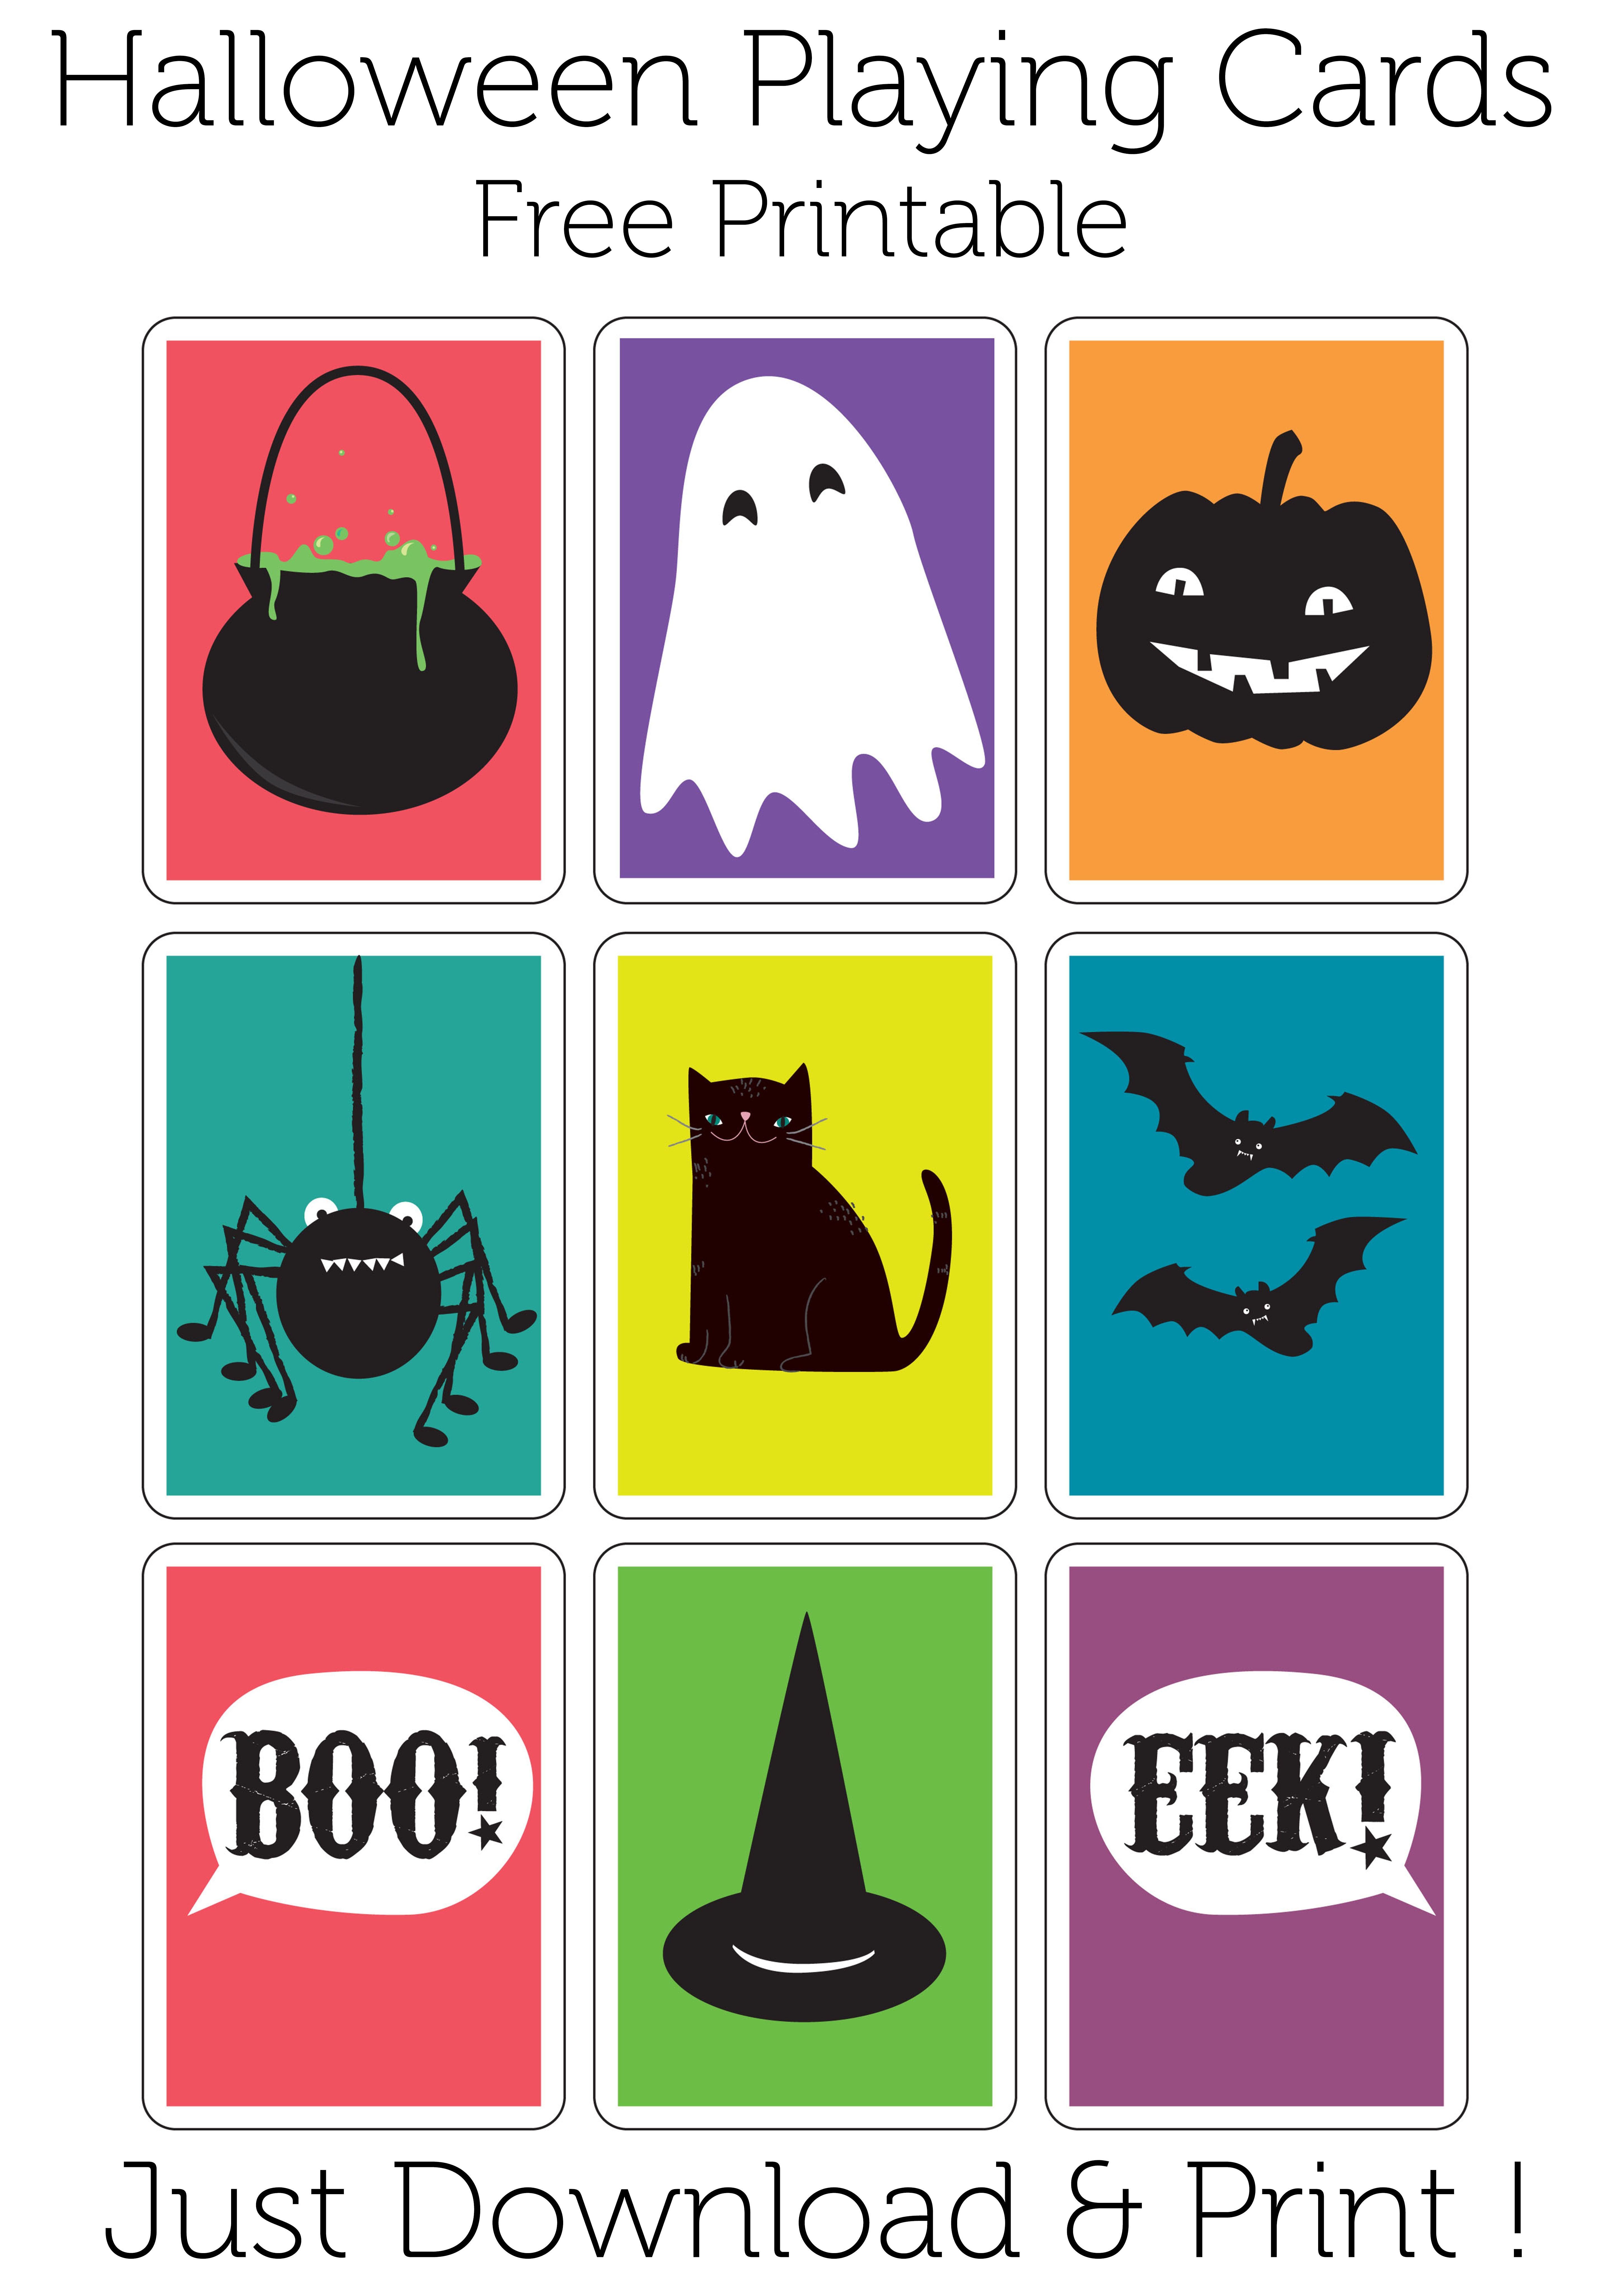 Play A Game Of Haunted Snap With These Halloween Playing Cards. Free - Free Printable Snap Cards